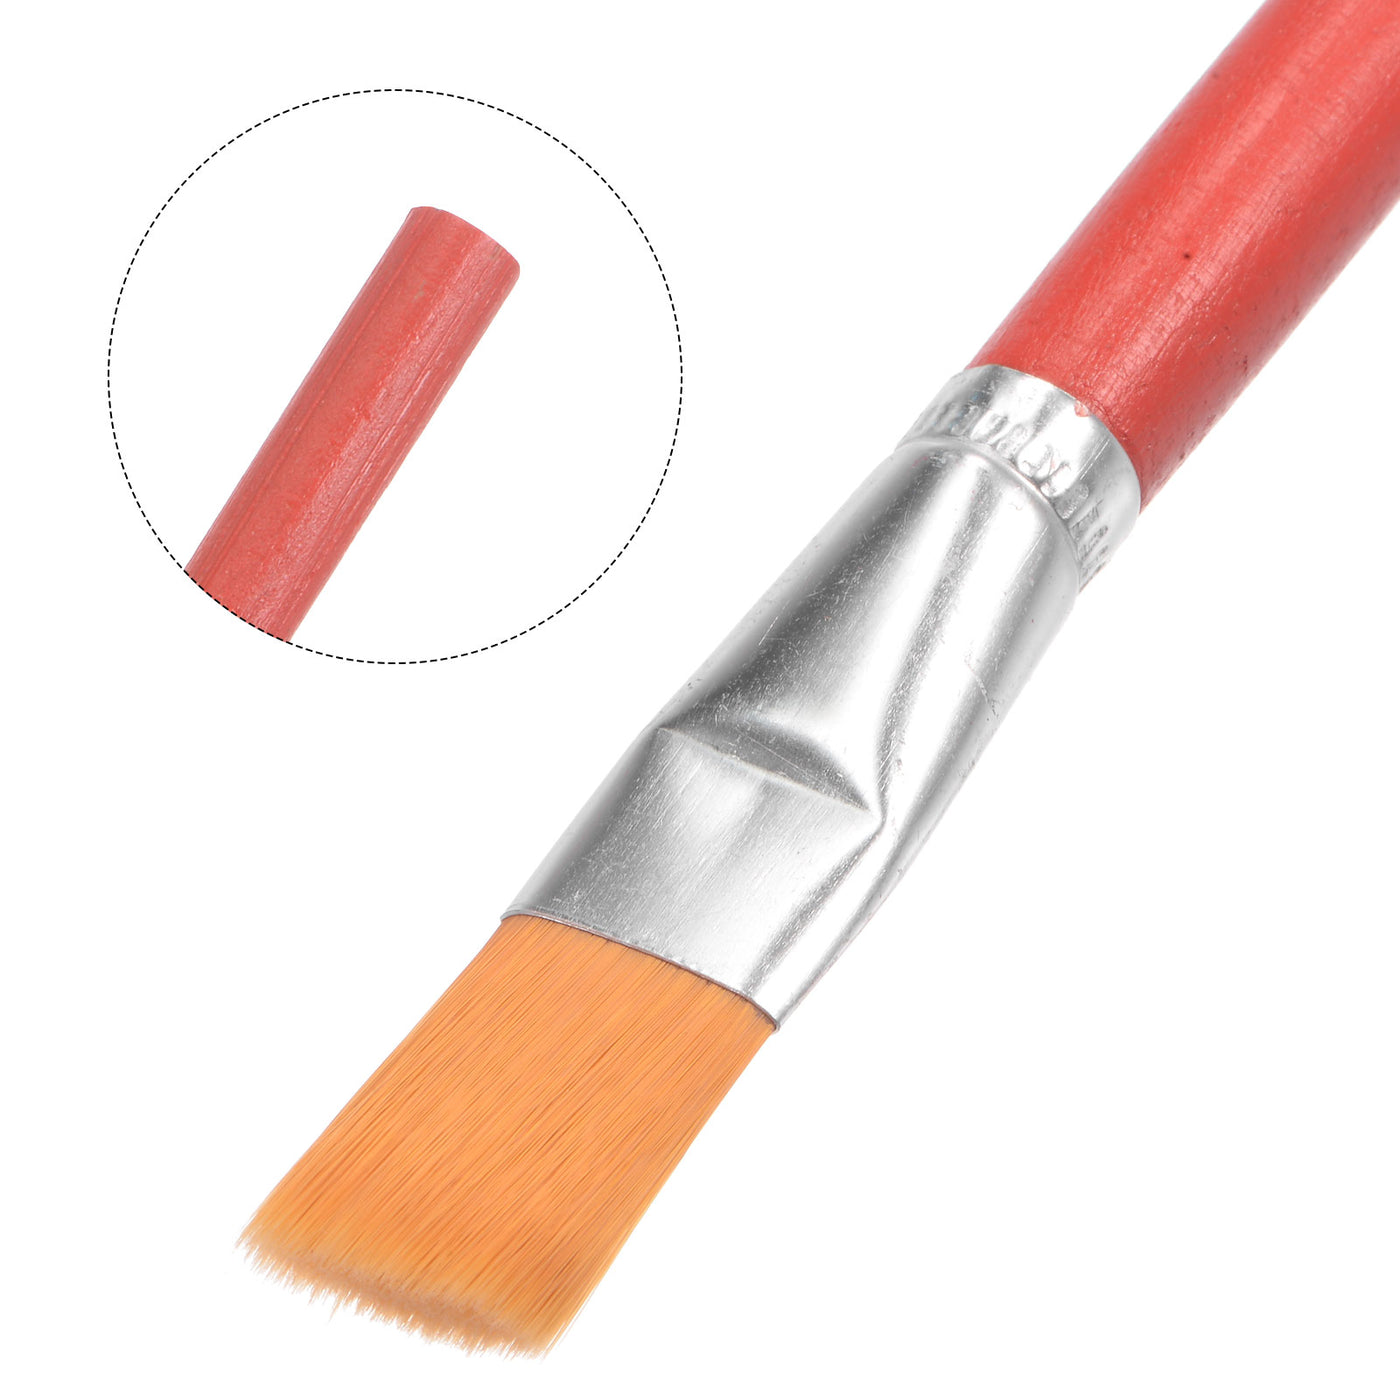 uxcell Uxcell Paint Brushes Flat Edge 0.71" Width 0.16" Thick Nylon Bristle Wood Handle 5Pcs